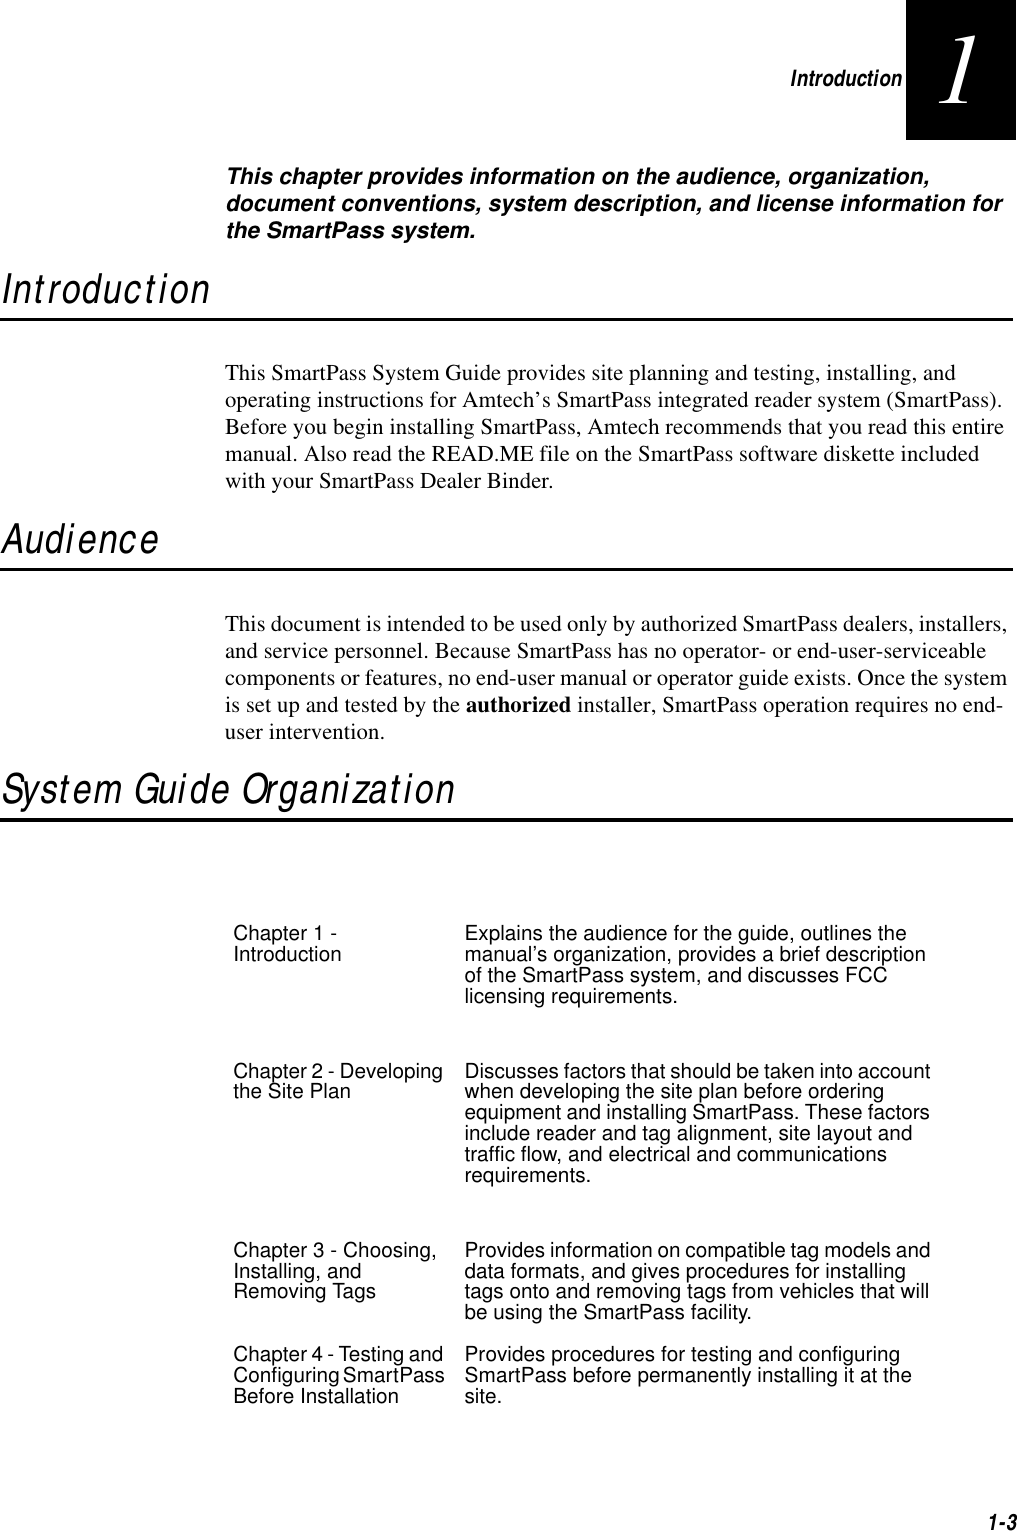 Introduction1-31This chapter provides information on the audience, organization, document conventions, system description, and license information for the SmartPass system.IntroductionThis SmartPass System Guide provides site planning and testing, installing, and operating instructions for Amtech’s SmartPass integrated reader system (SmartPass). Before you begin installing SmartPass, Amtech recommends that you read this entire manual. Also read the READ.ME file on the SmartPass software diskette included with your SmartPass Dealer Binder.AudienceThis document is intended to be used only by authorized SmartPass dealers, installers, and service personnel. Because SmartPass has no operator- or end-user-serviceable components or features, no end-user manual or operator guide exists. Once the system is set up and tested by the authorized installer, SmartPass operation requires no end-user intervention.System Guide OrganizationChapter 1 - Introduction Explains the audience for the guide, outlines the manual’s organization, provides a brief description of the SmartPass system, and discusses FCC licensing requirements.Chapter 2 - Developing the Site Plan Discusses factors that should be taken into account when developing the site plan before ordering equipment and installing SmartPass. These factors include reader and tag alignment, site layout and traffic flow, and electrical and communications requirements.Chapter 3 - Choosing, Installing, and Removing TagsProvides information on compatible tag models and data formats, and gives procedures for installing tags onto and removing tags from vehicles that will be using the SmartPass facility.Chapter 4 - Testing and Configuring SmartPass Before InstallationProvides procedures for testing and configuring SmartPass before permanently installing it at the site.